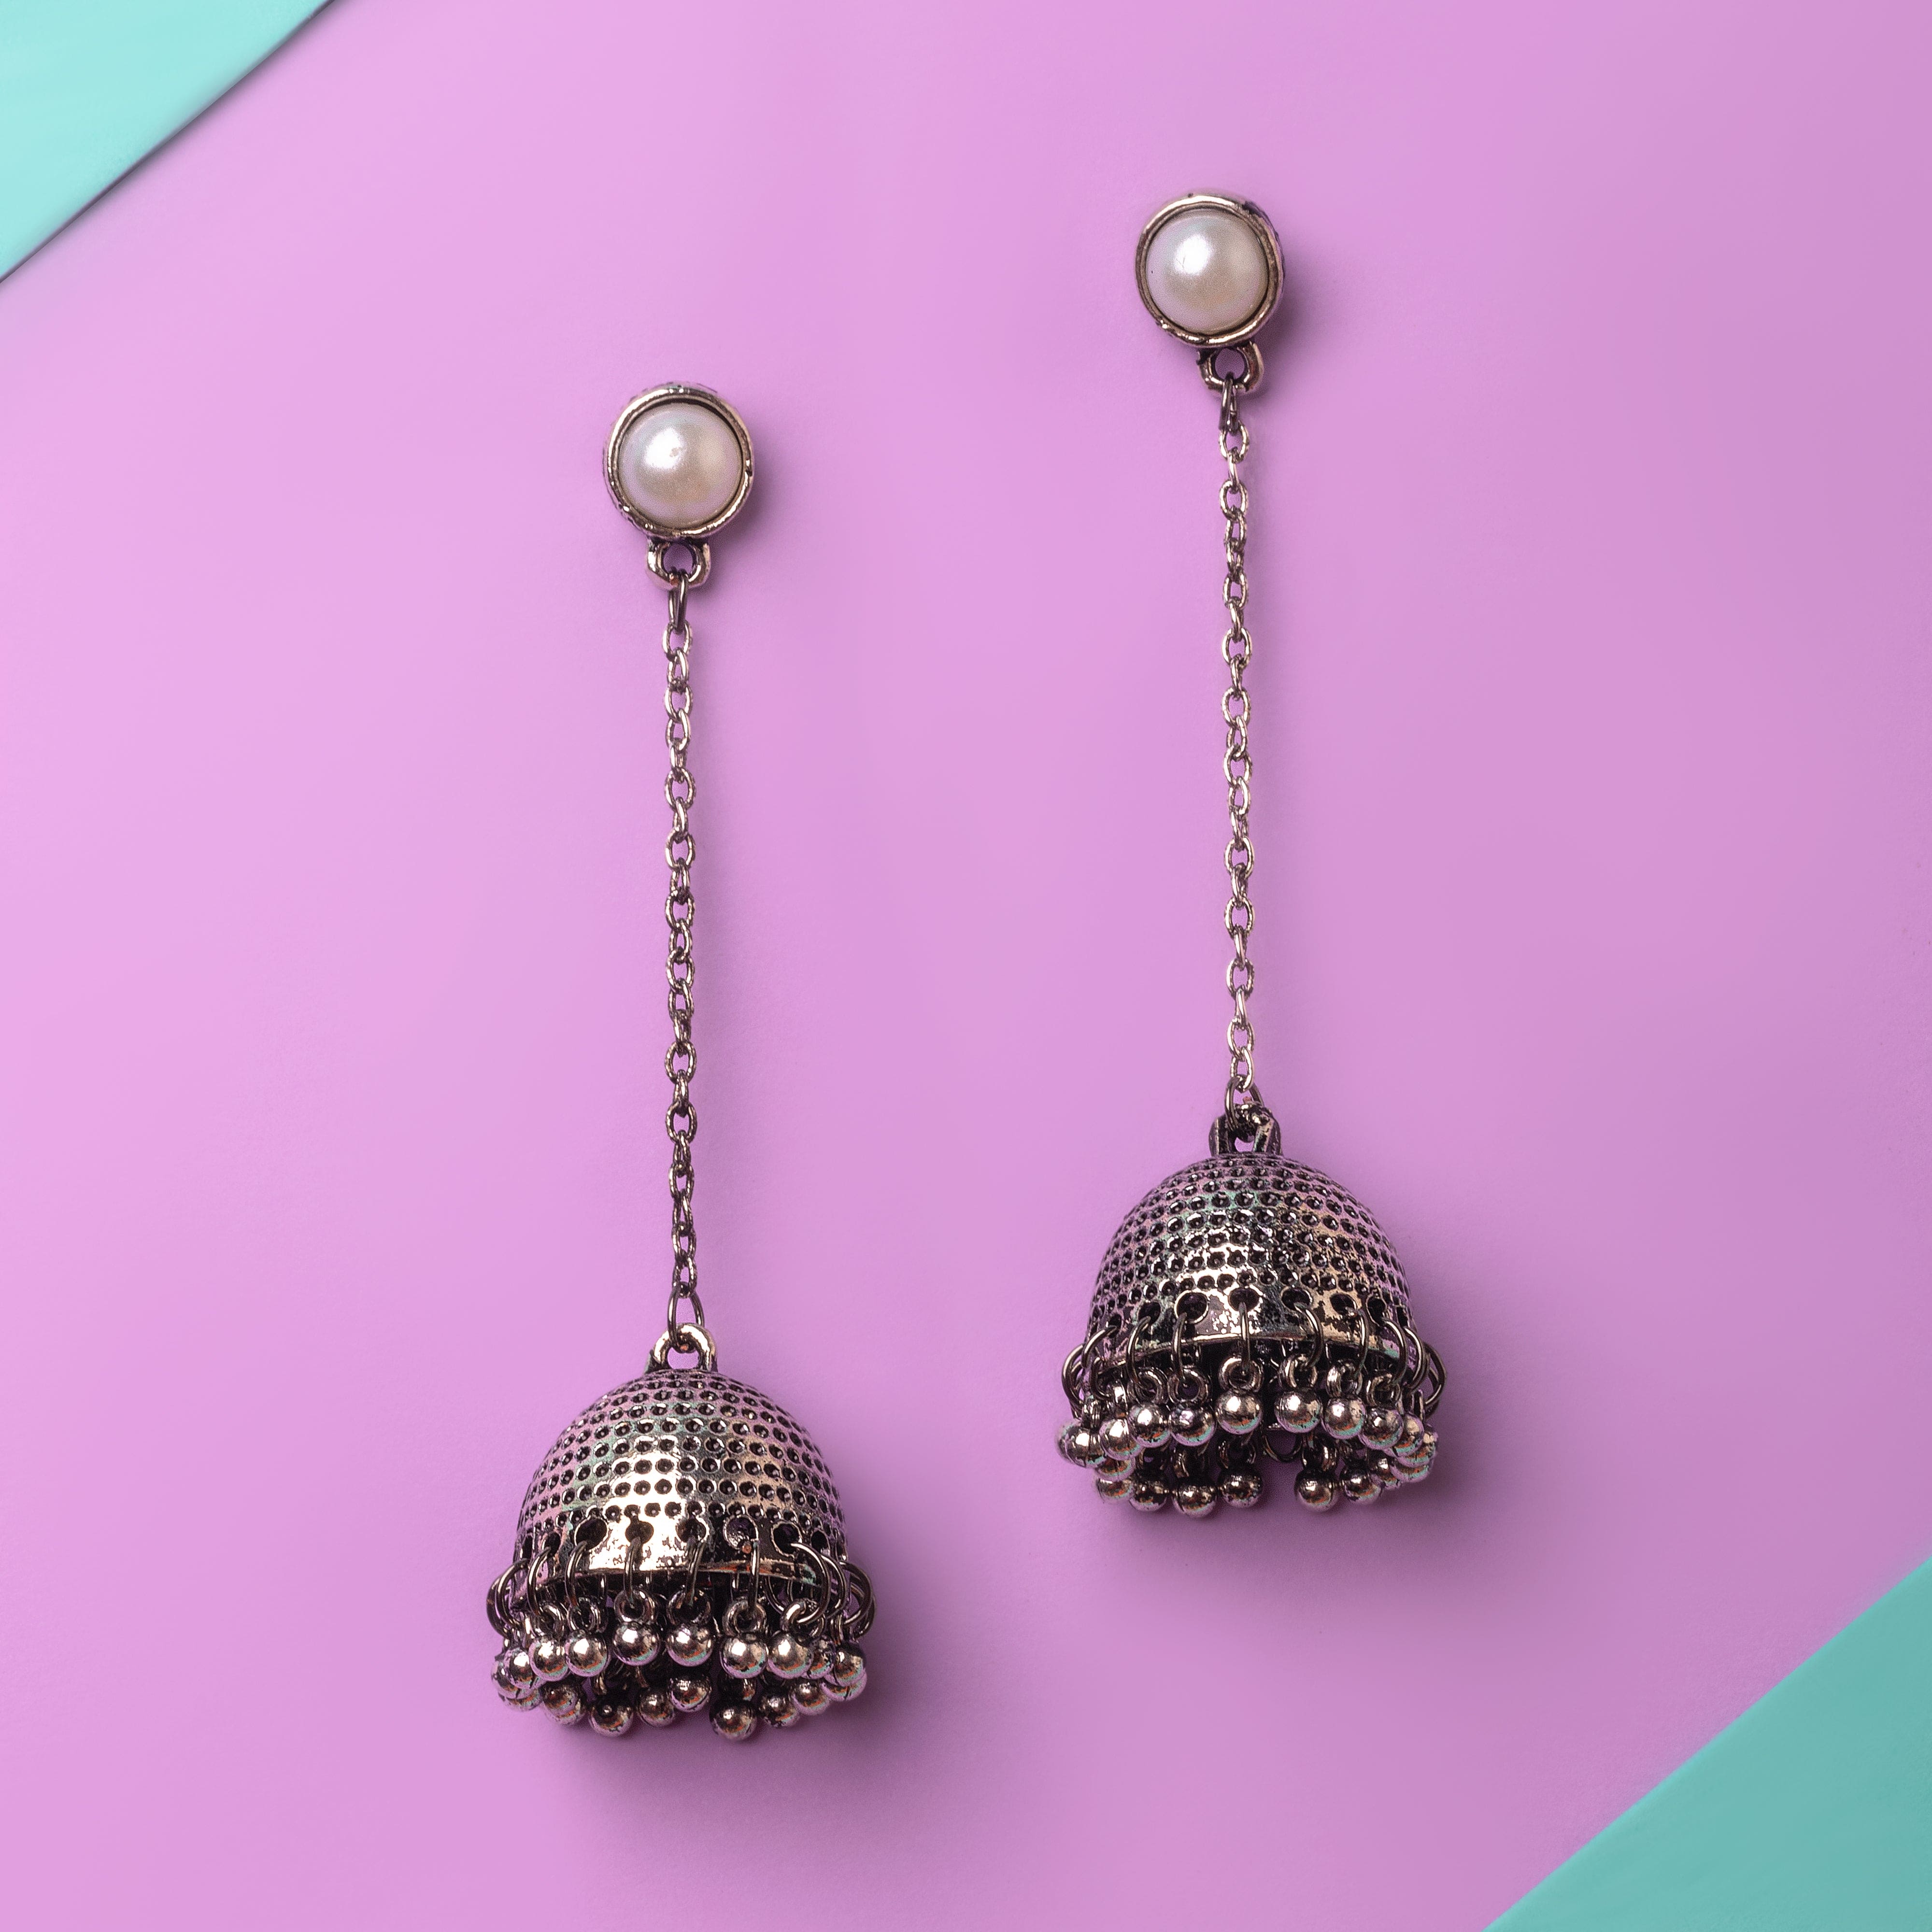 Buy Silver Gold Oxidized Jhumkas by Noor Online at Aza Fashions.